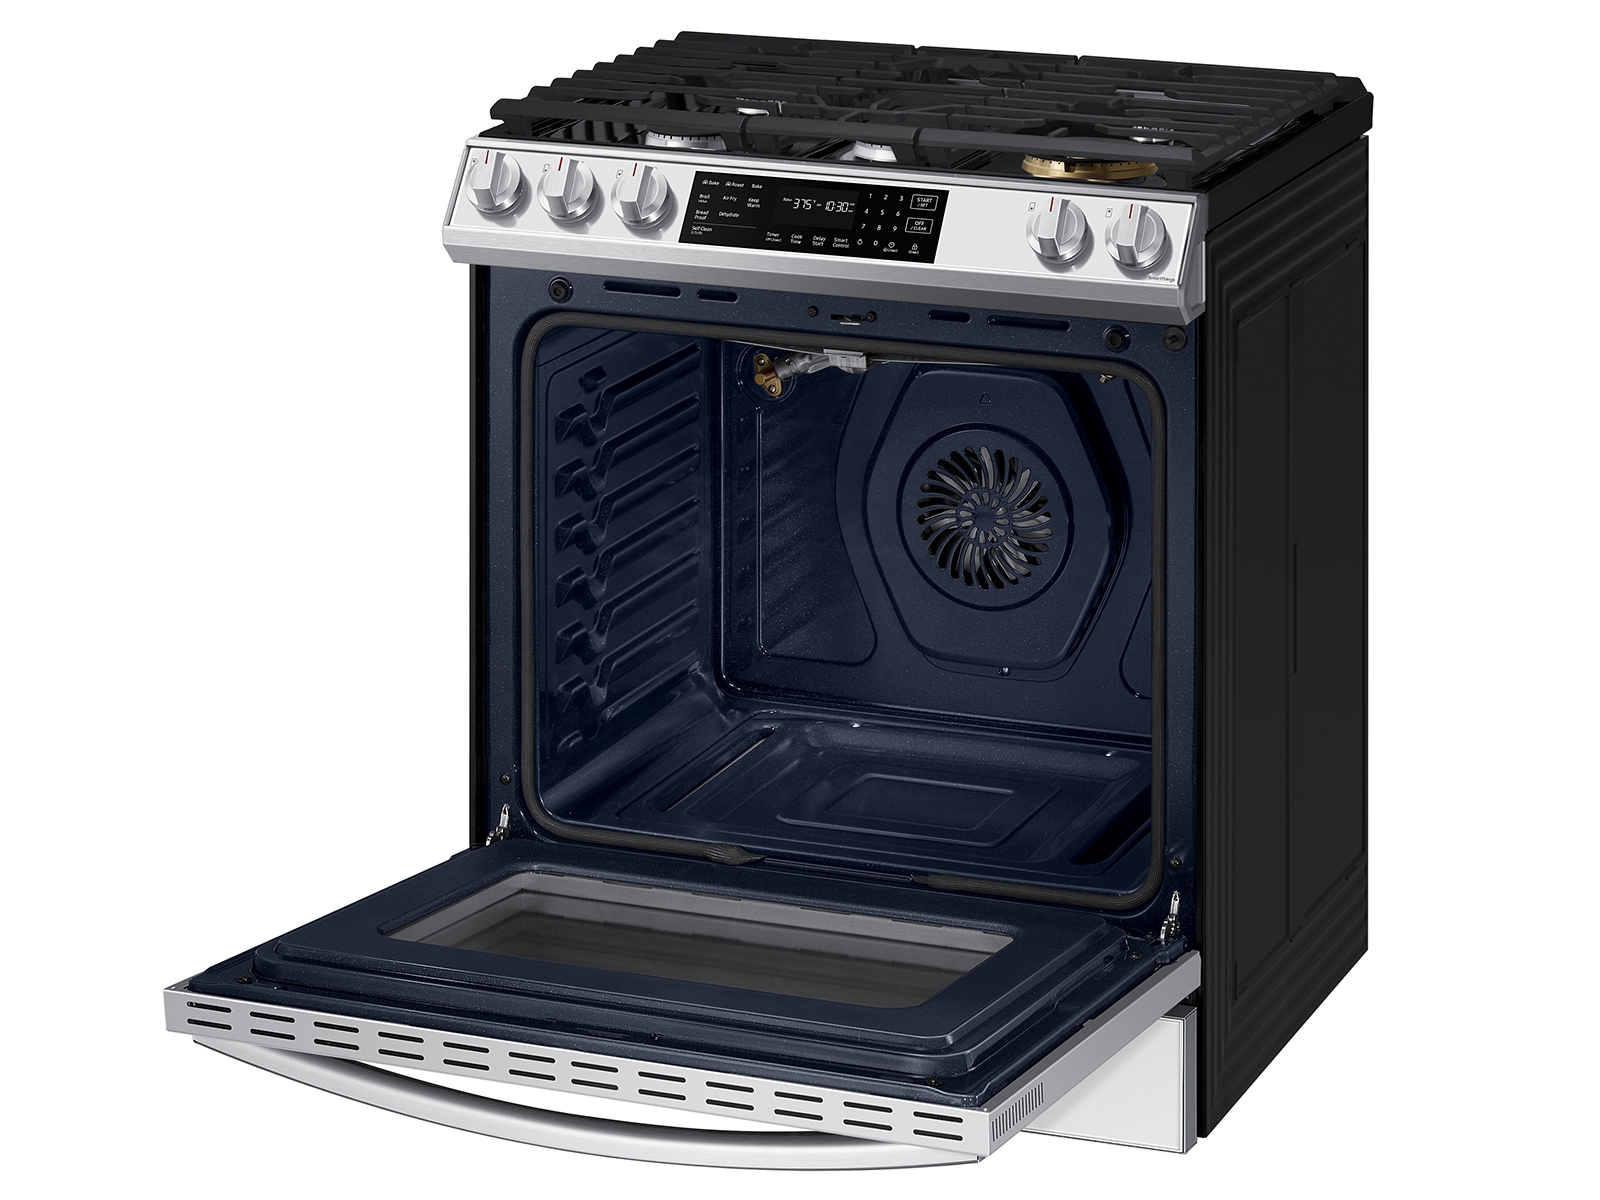 Thumbnail image of Bespoke 6.0 cu. ft. Smart Front Control Slide-In Gas Range with Air Fry &amp; Wi-Fi in White Glass